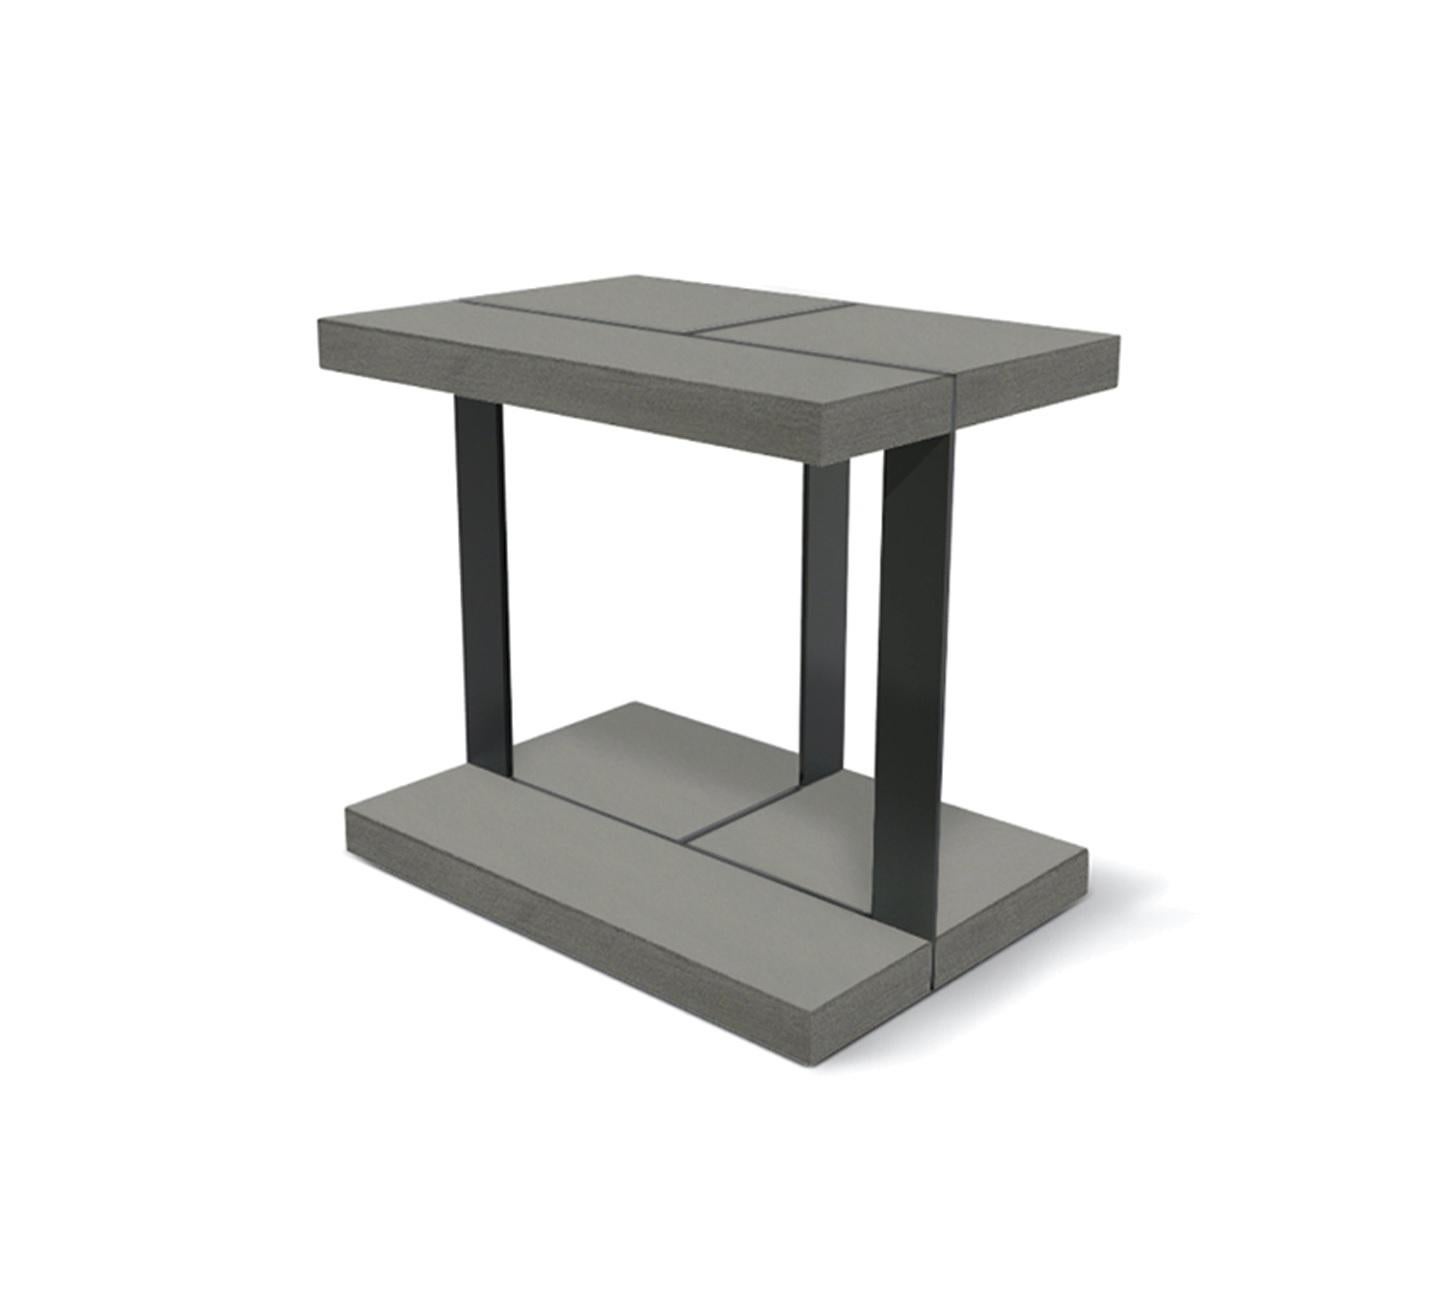 Brushed oak amondrian side table by LK Edition.
Limited Edition. 
Dimensions: 80 x 60 x H 68 cm 
Materials: Brushed oak and black painted metal. 

It is with the sense of detail and requirement, this research of the exception by the selection